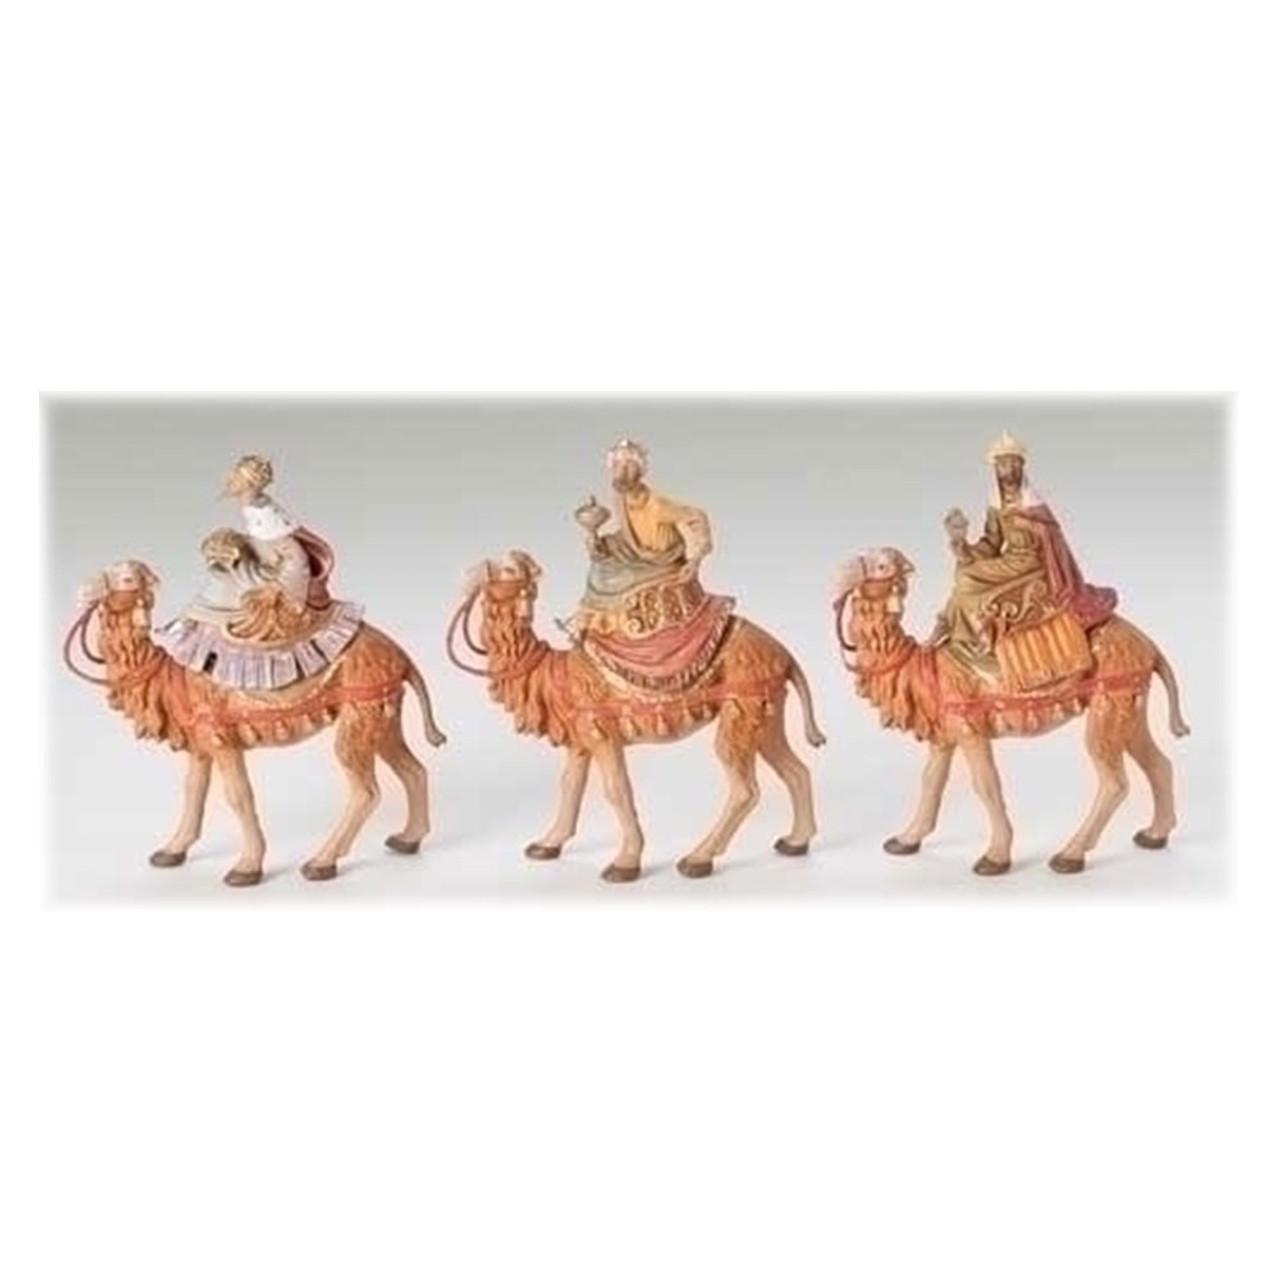 Three Kings on Camels 5 Inch Nativity Figurines